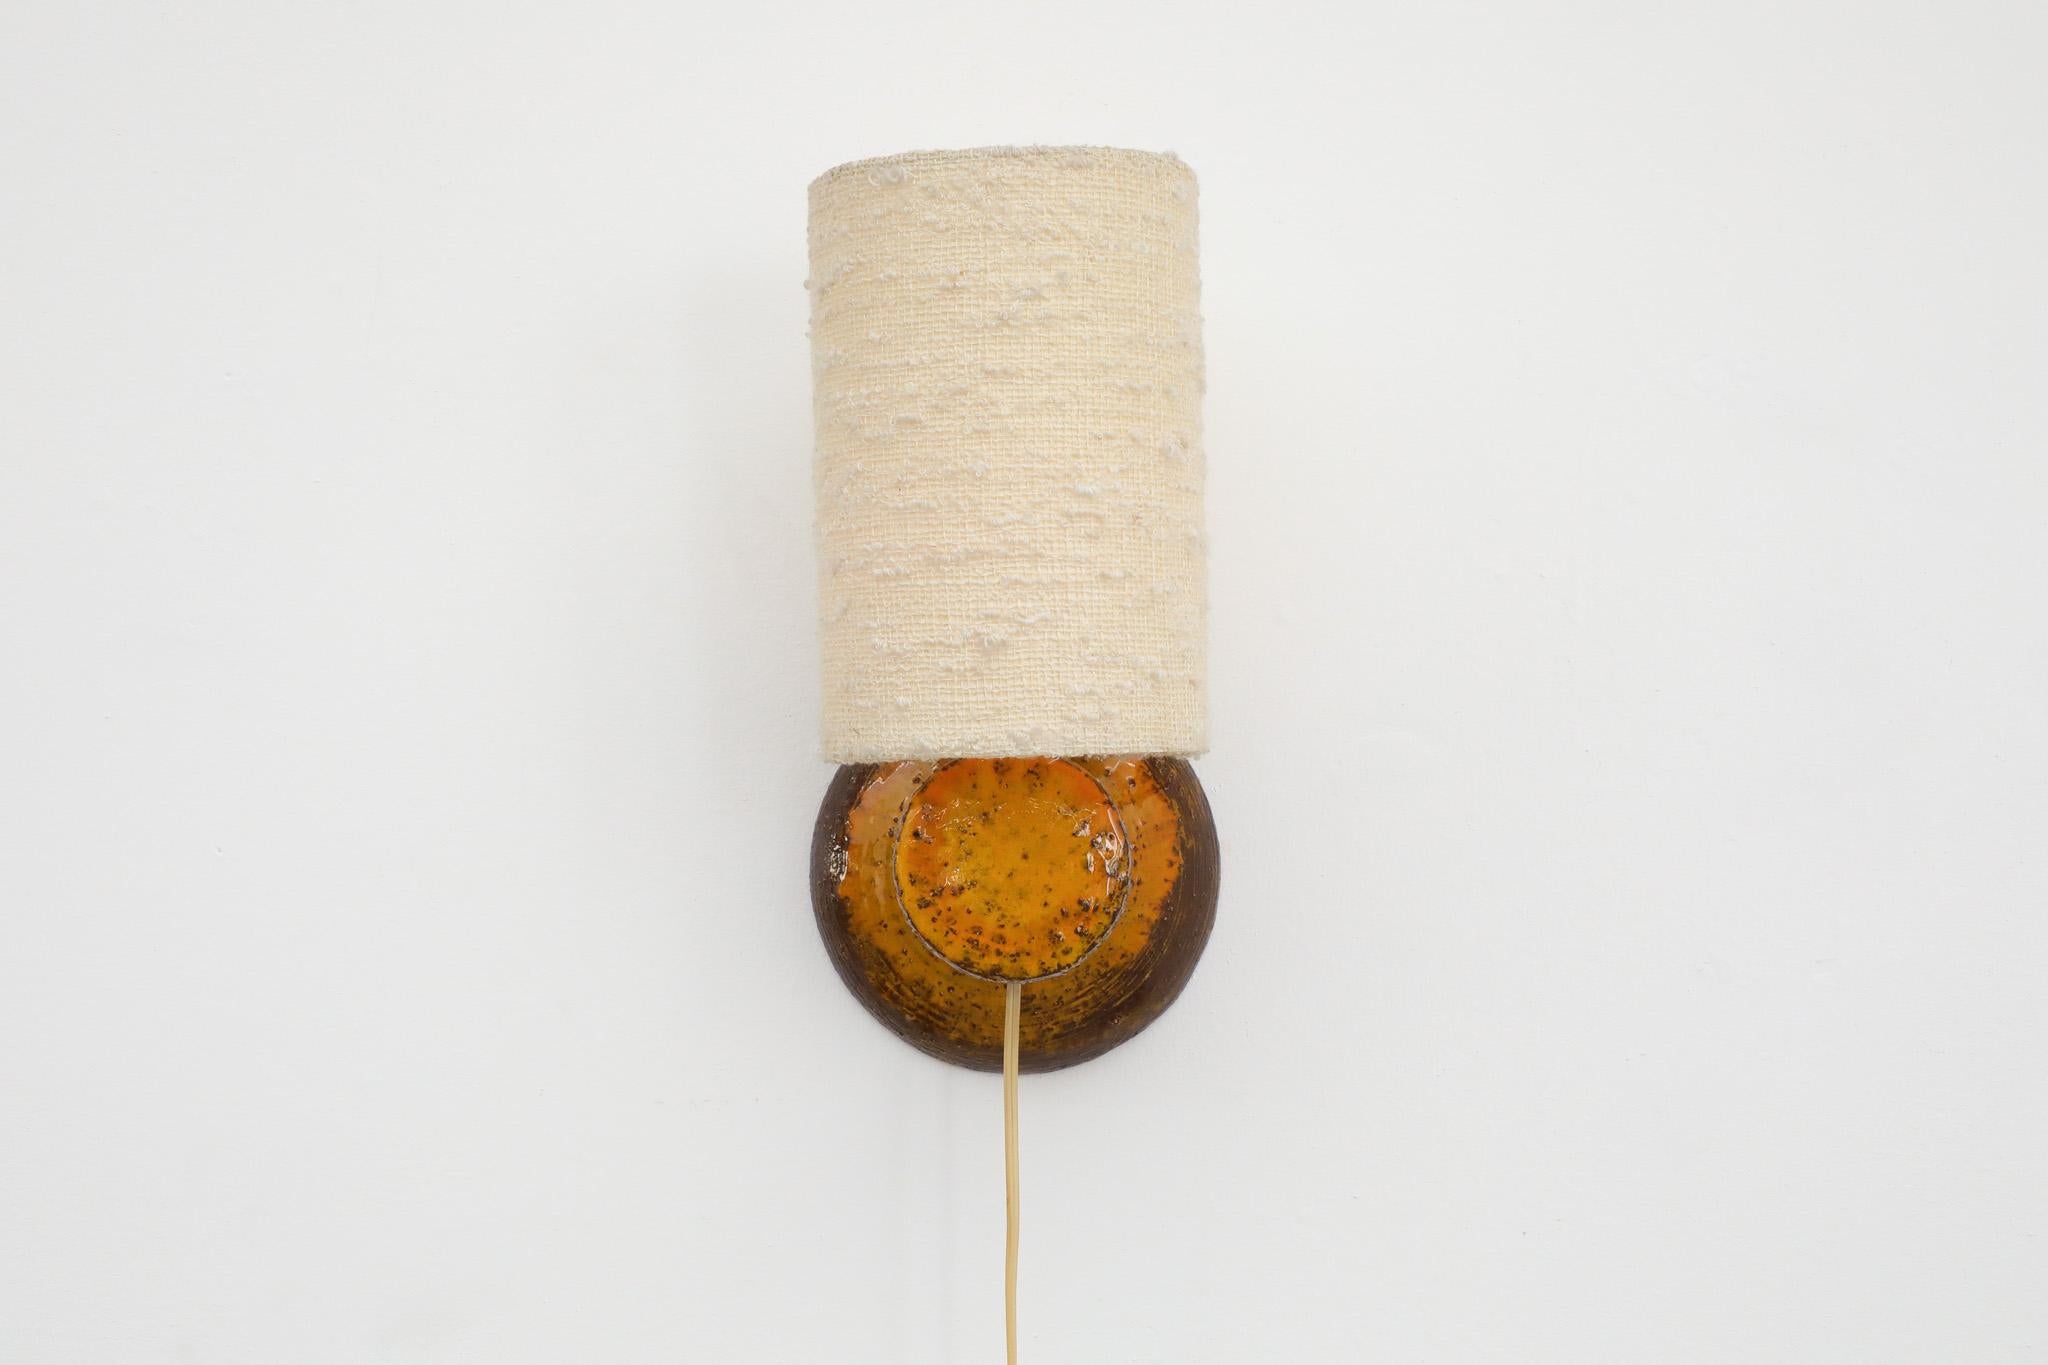 Mid-Century, ochre and brown glazed, 1970s ceramic wall sconce complete with small linen drum shade. In original condition with some visible wear consistent with its age and use. Single E26/27 bulb.